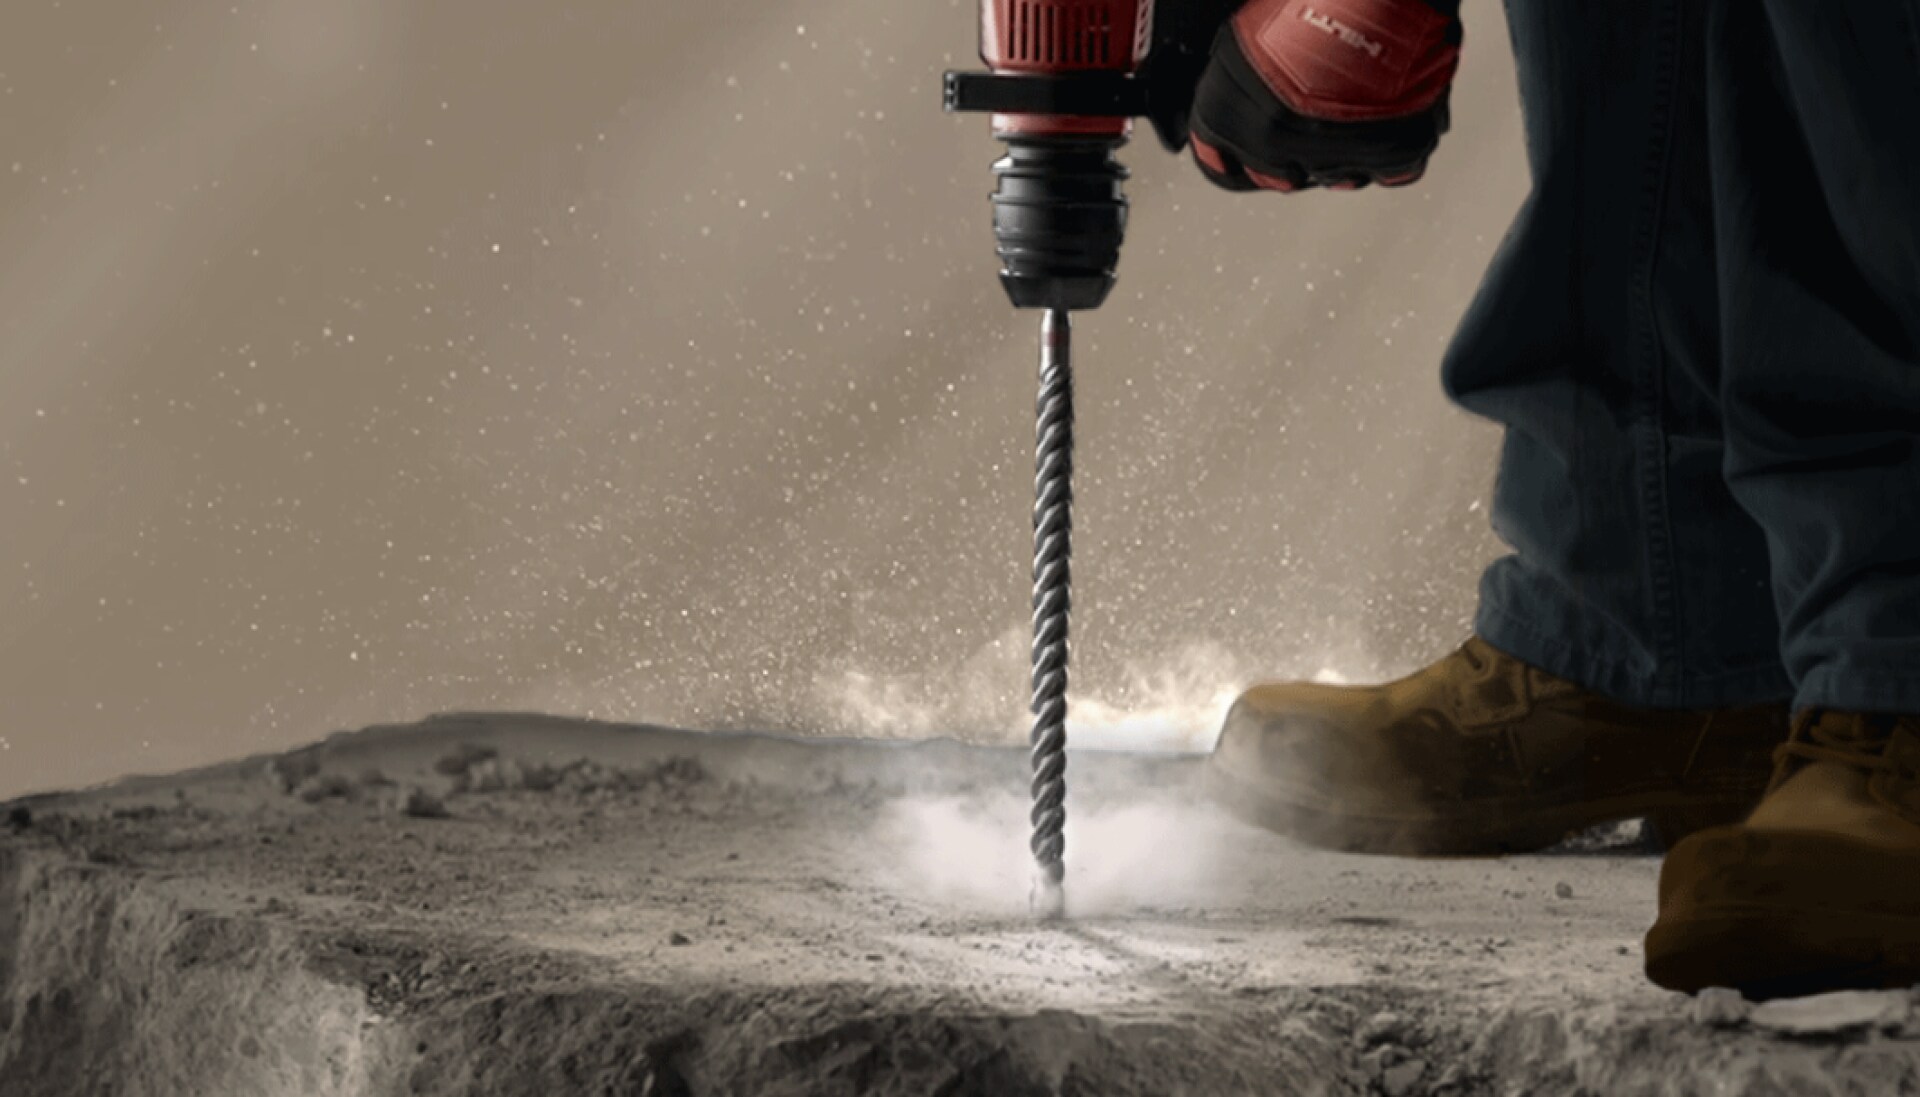 Tool drilling into cement and stirring up dust